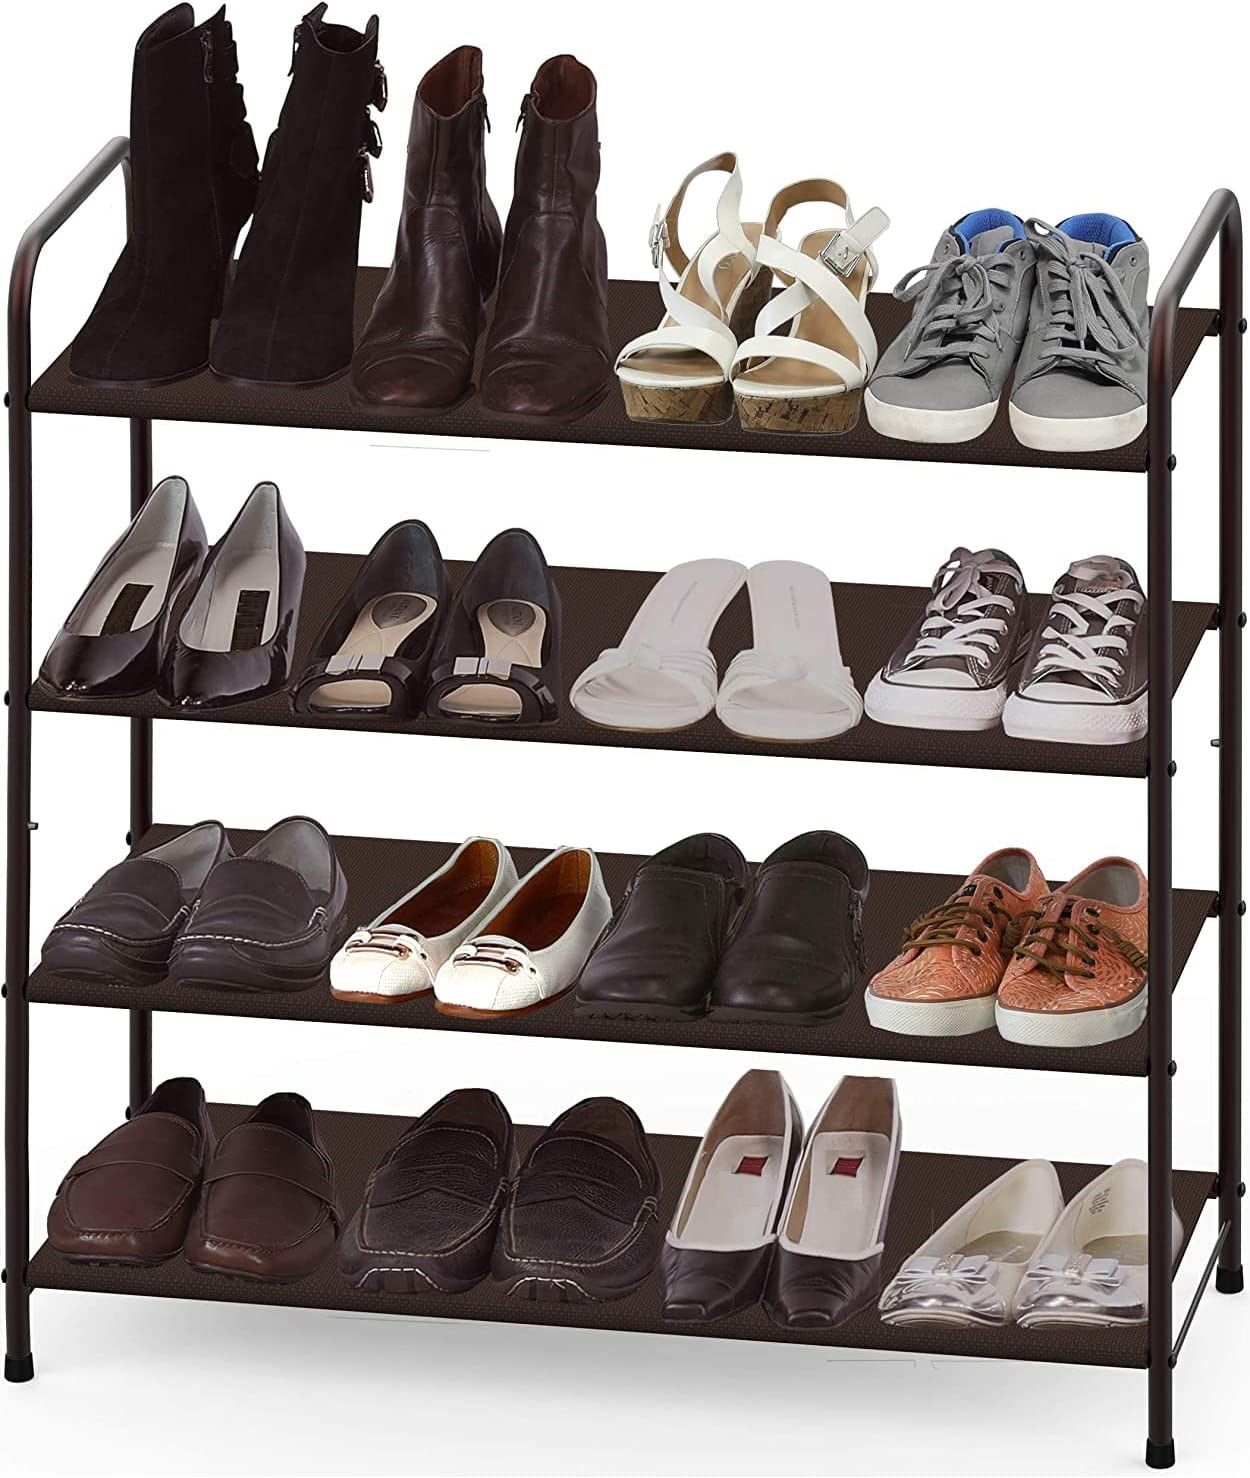 Keep Your Shoes Neat and Tidy with a Space-Saving 4 Tier Metal Shoe Rack